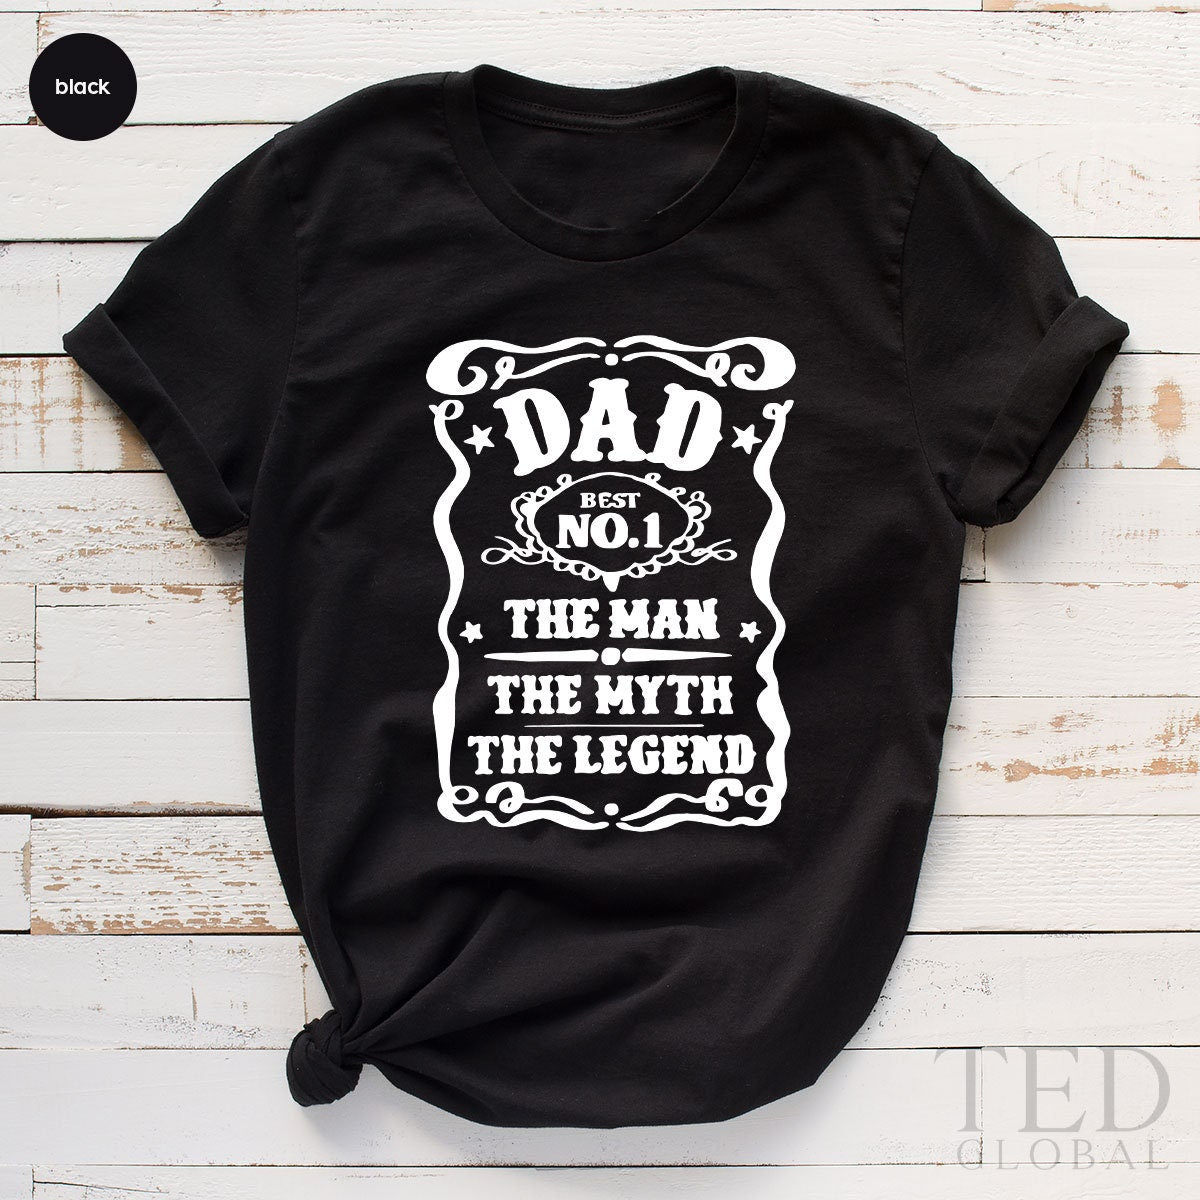 Dad Shirts - Great T-Shirts for Dad